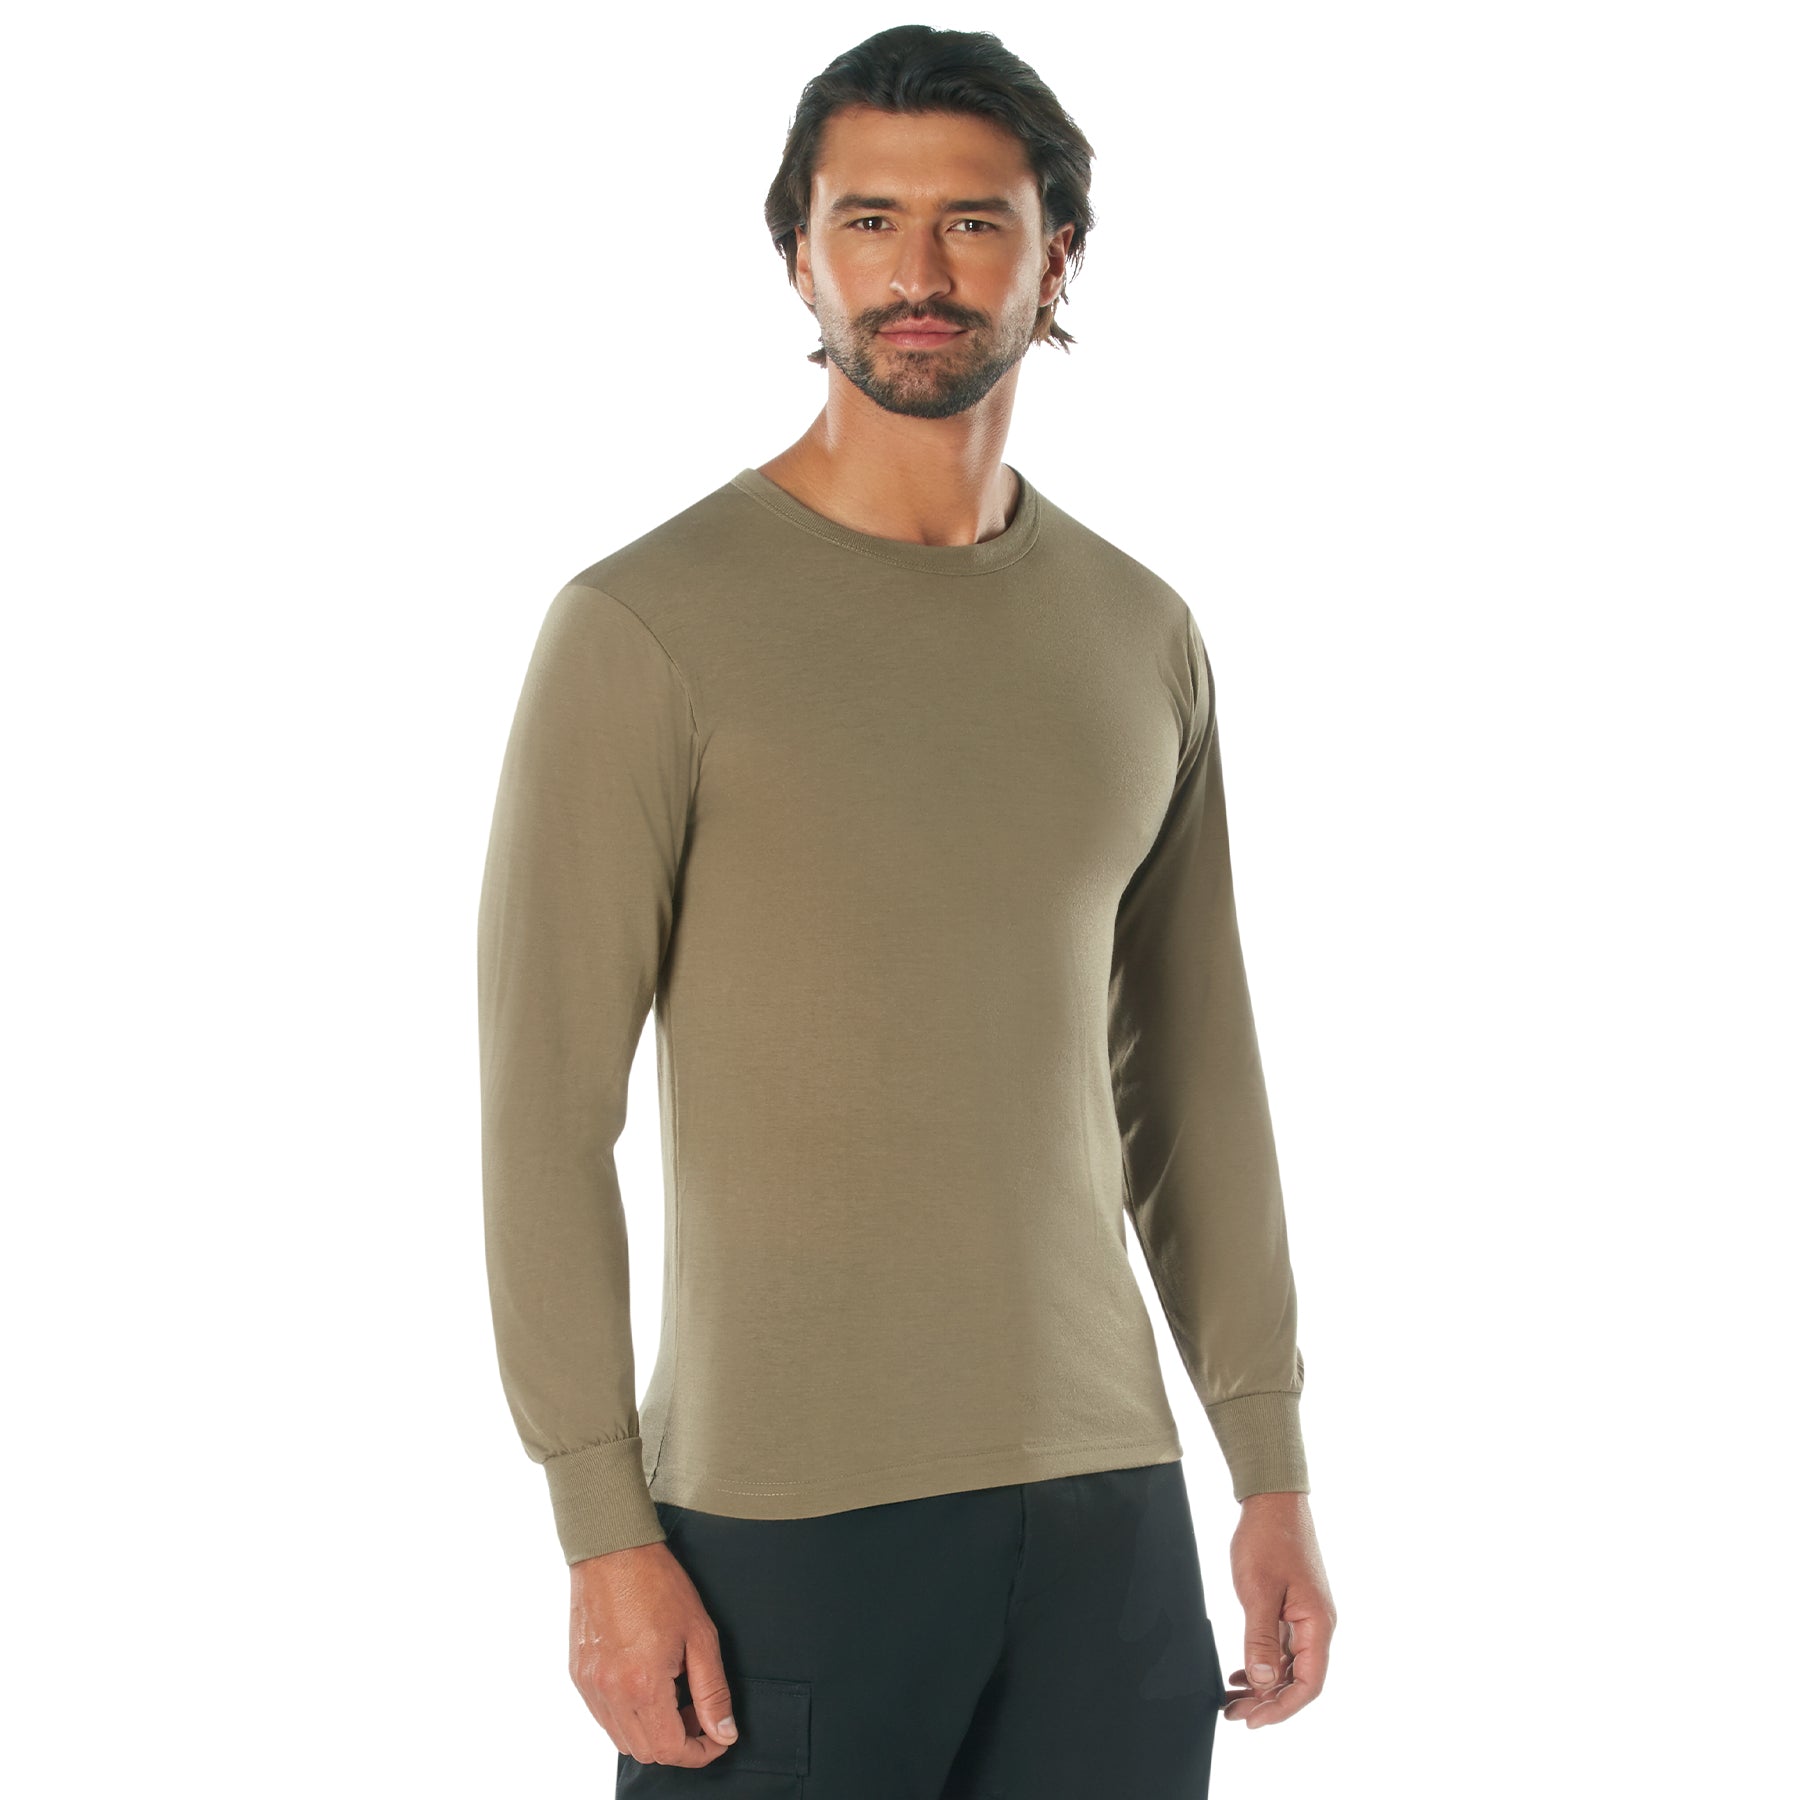 [AR 670-1] Poly Moisture Wicking Long Sleeve Shirts Coyote Brown AR 670-1